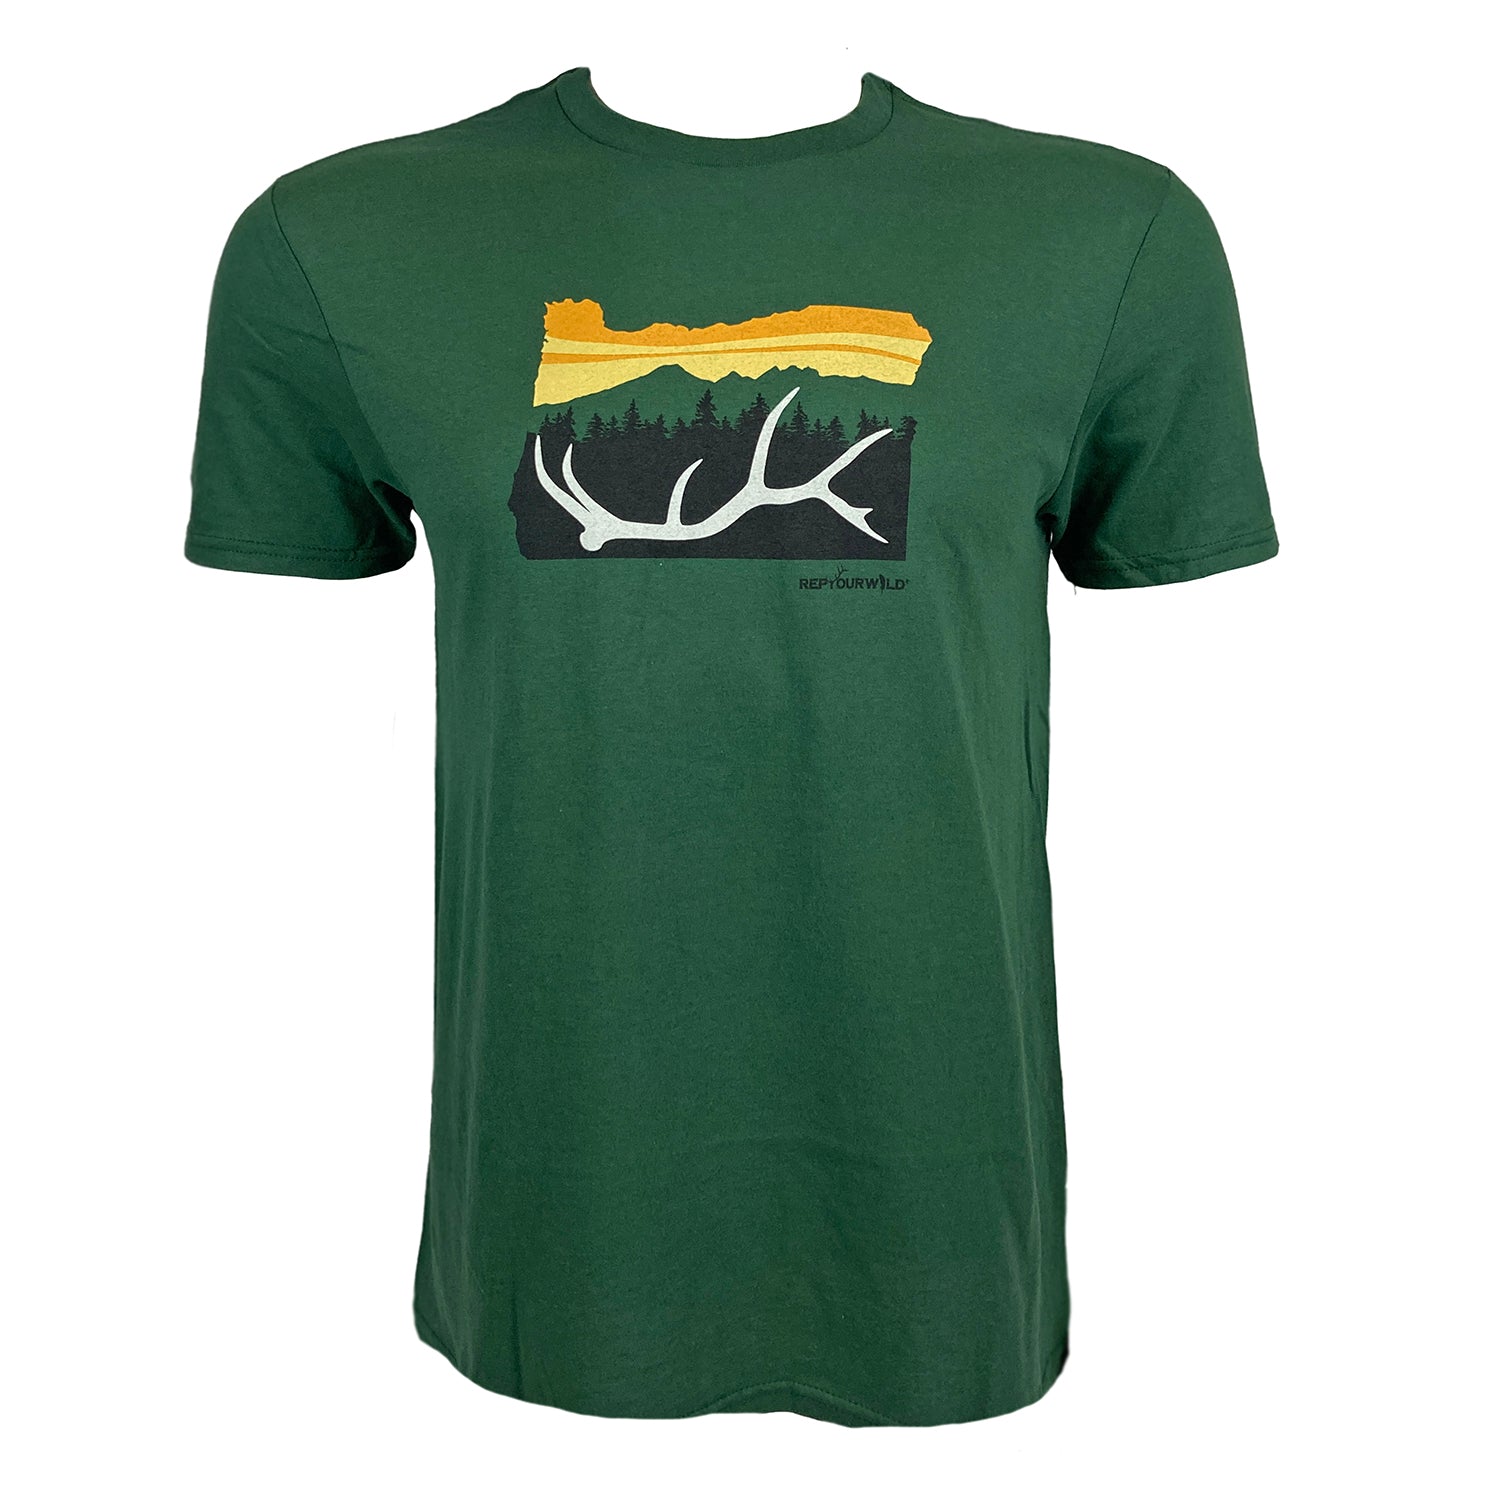 Green tee shown from the front with Oregon silhouette made from sunset, mountains, pines and elk antler across the chest.